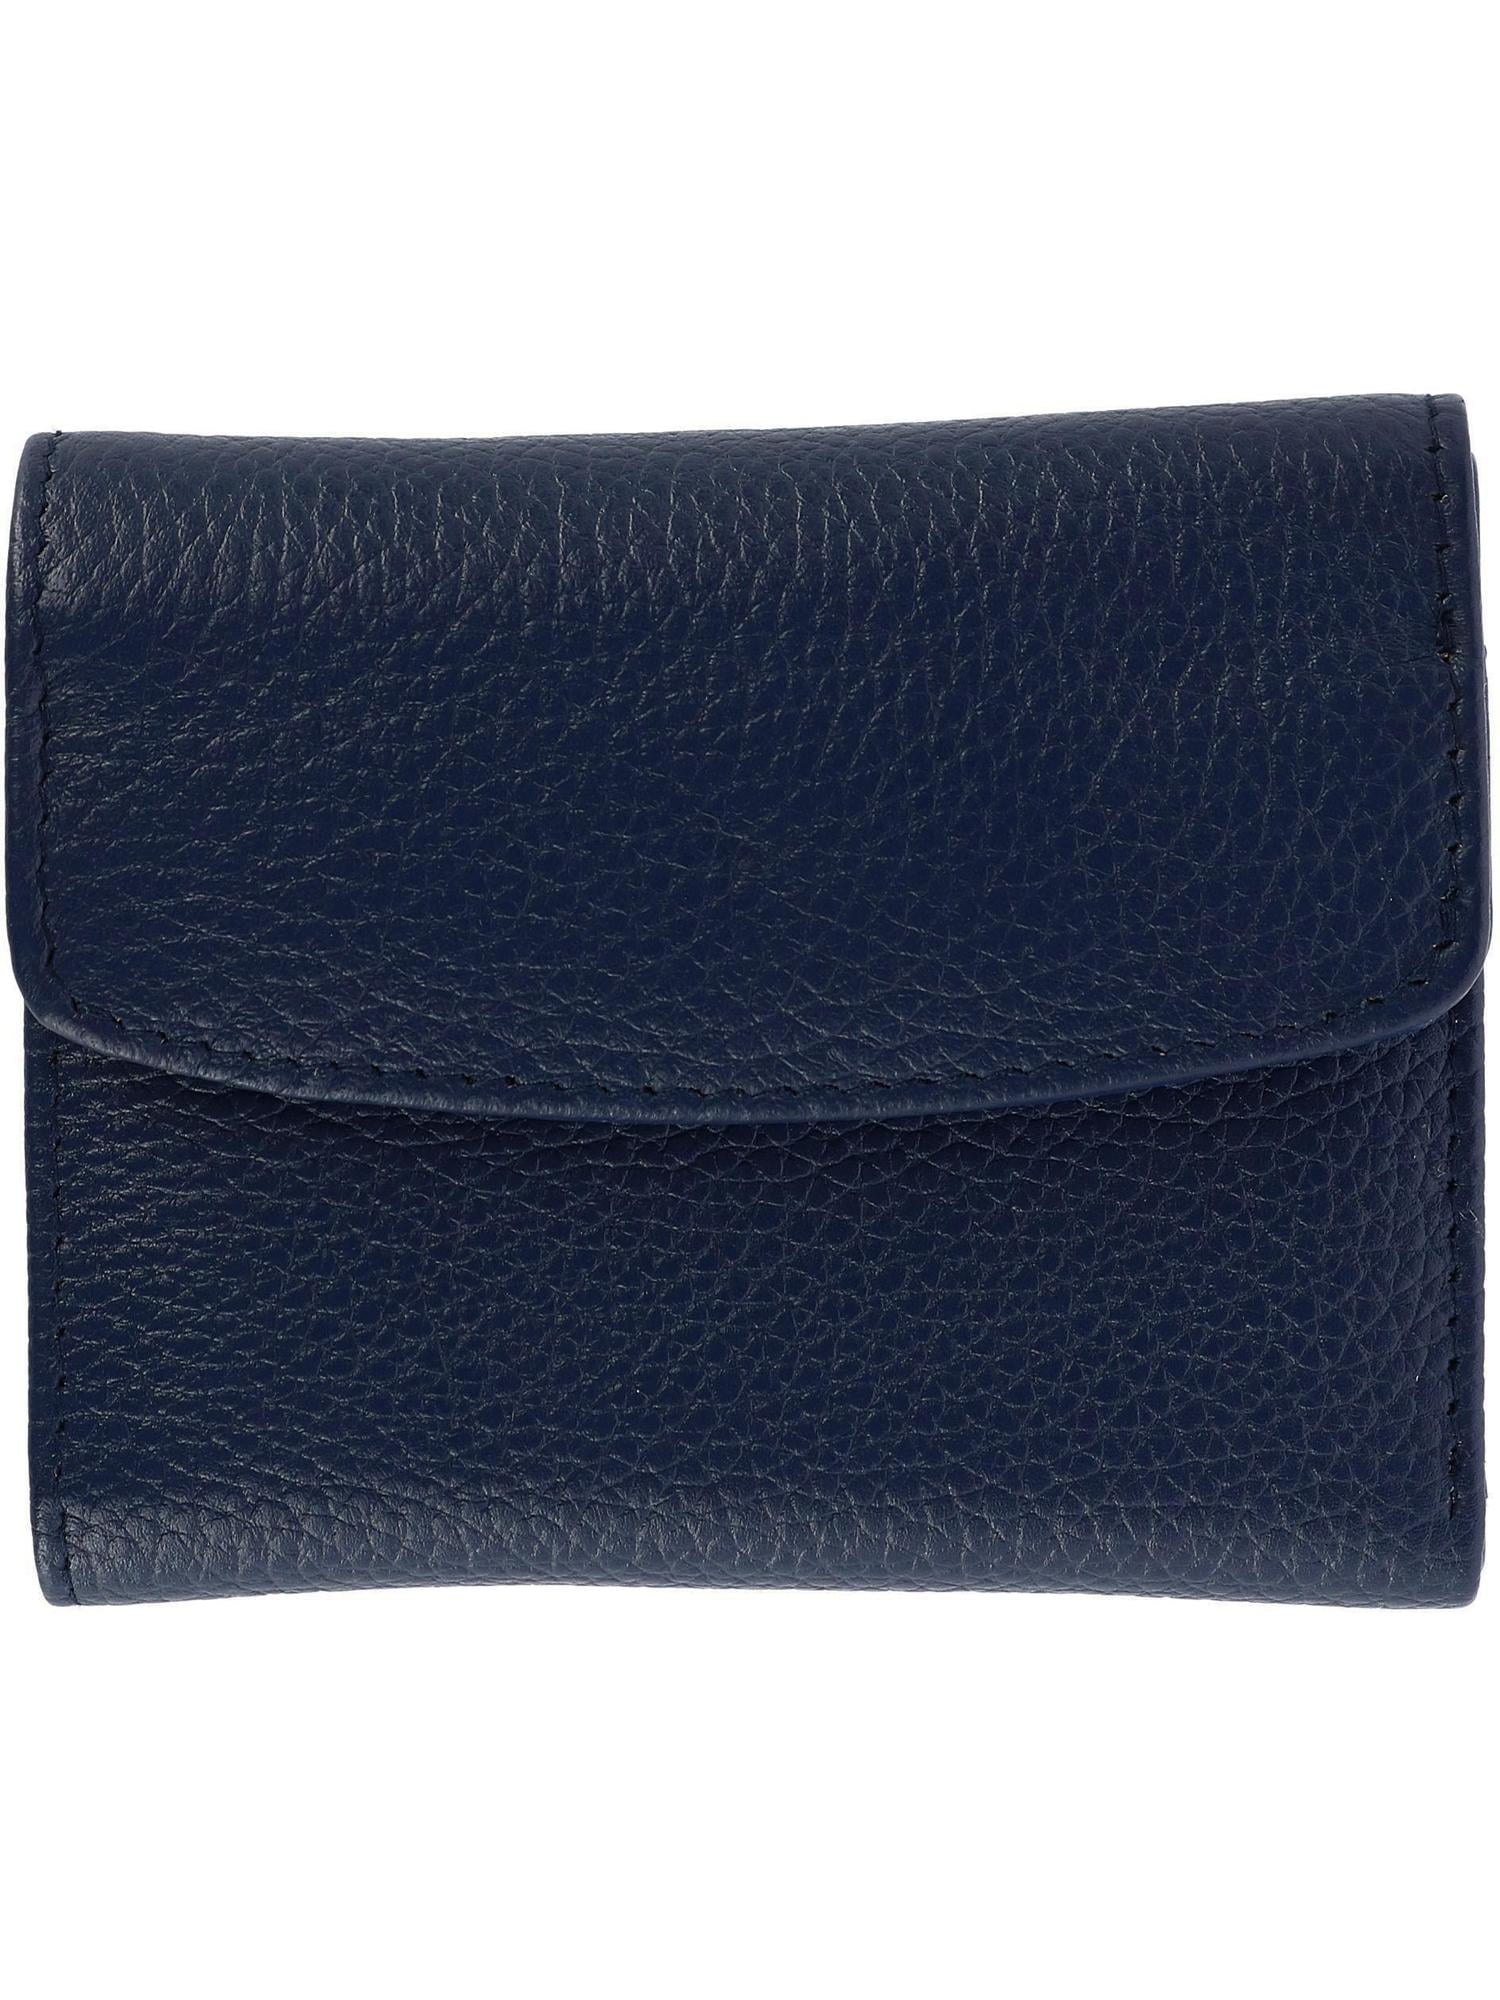 Buxton Trifold Men's Wallets | IUCN Water